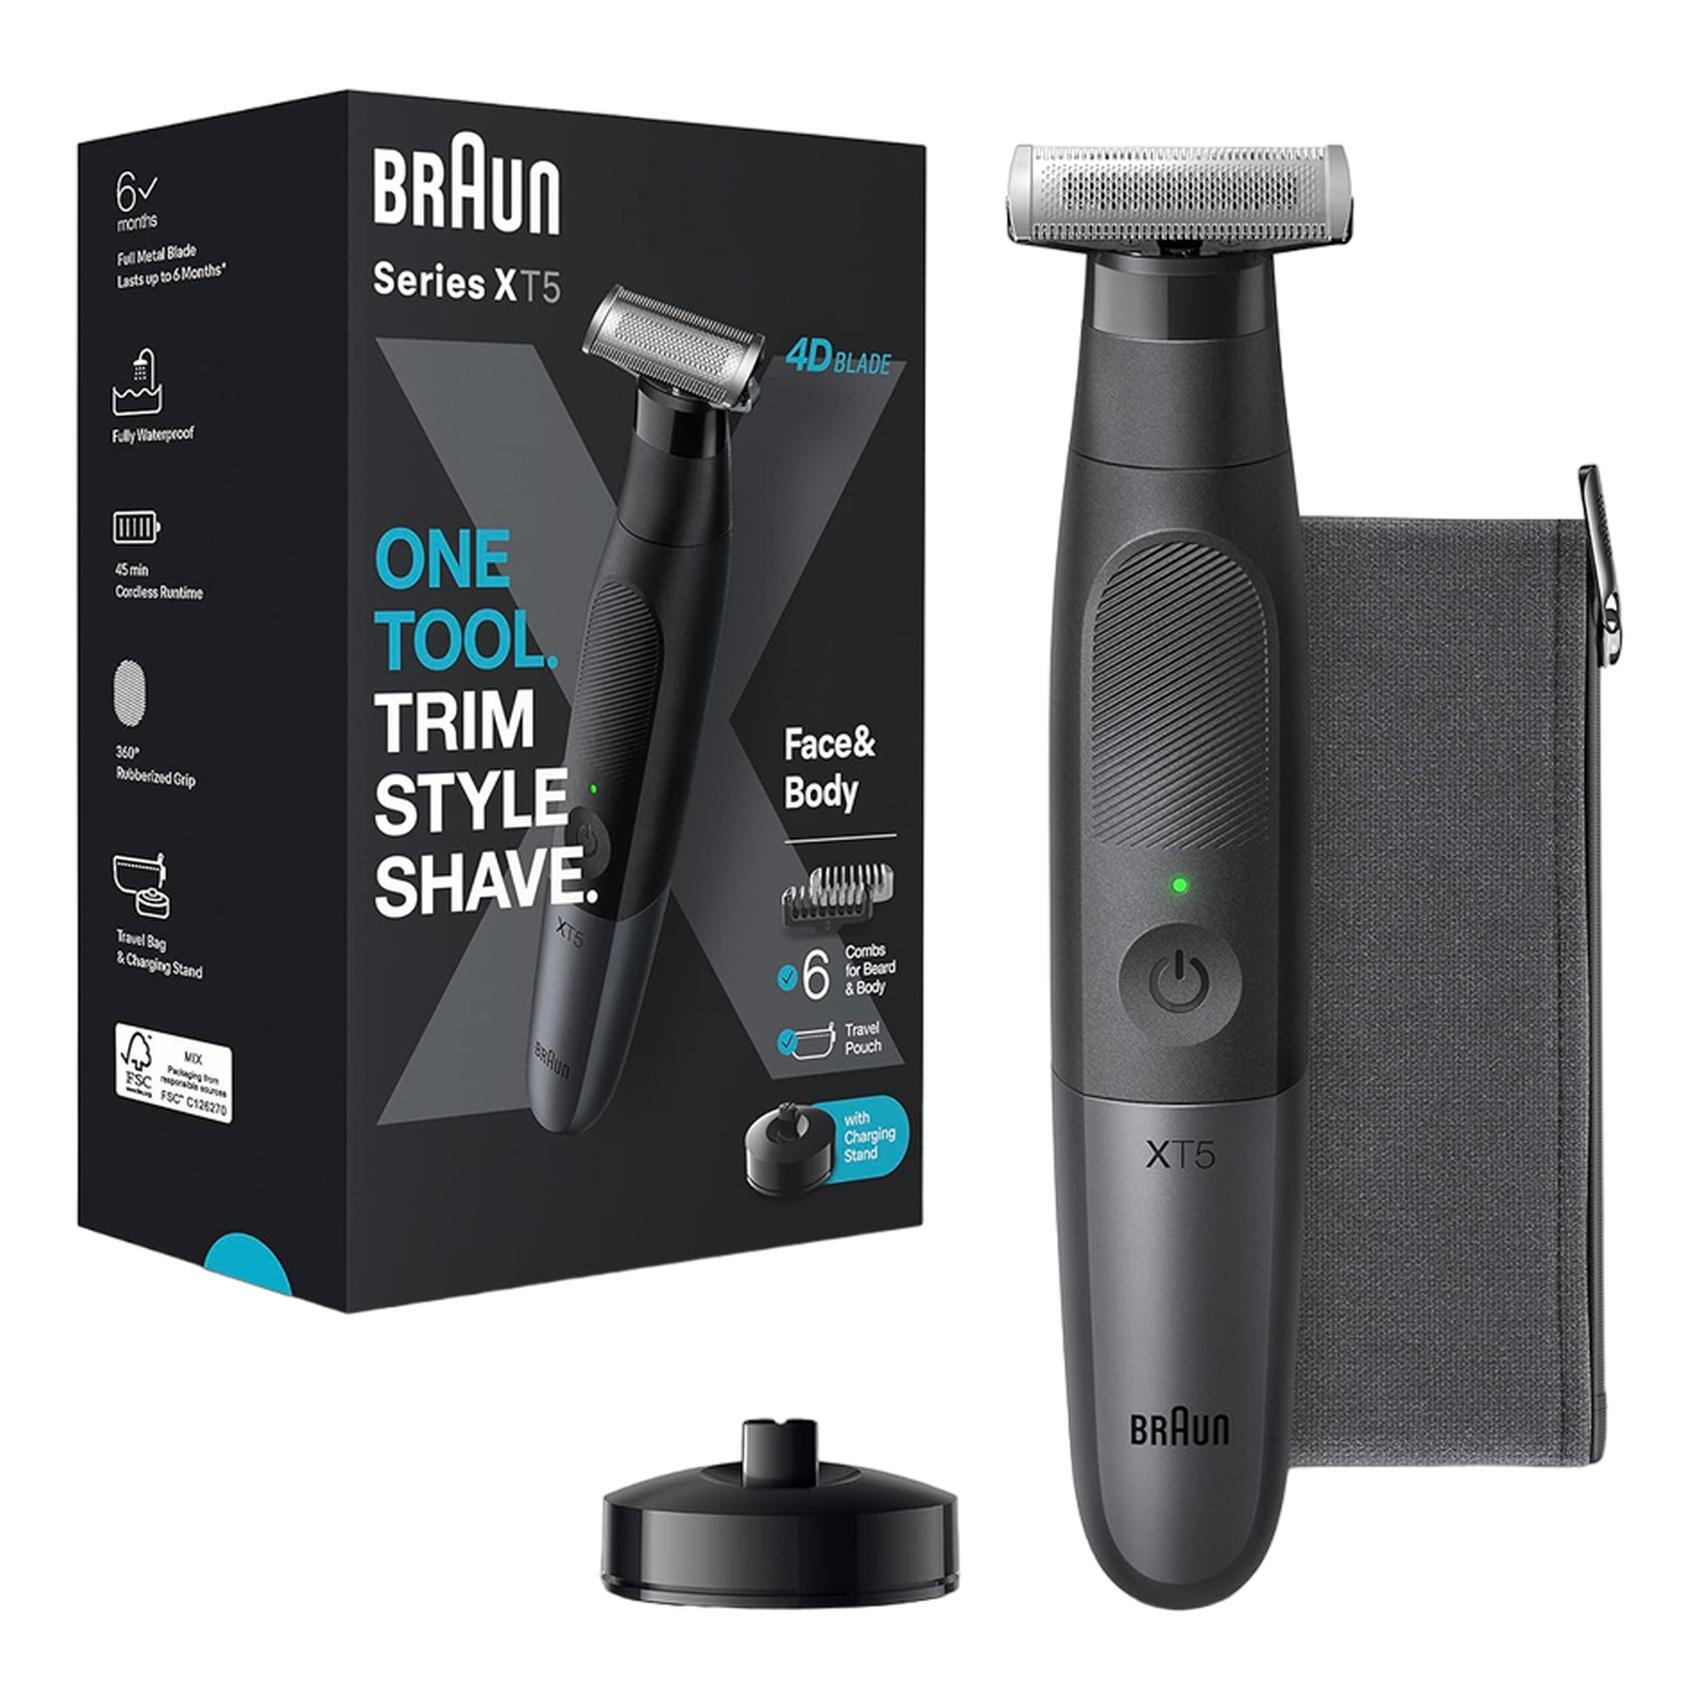 Braun Electric Razor for Men, Series 8 8457cc Electric Foil Shaver with  Precision Beard Trimmer, Cleaning & Charging SmartCare Center, Galvano  Silver